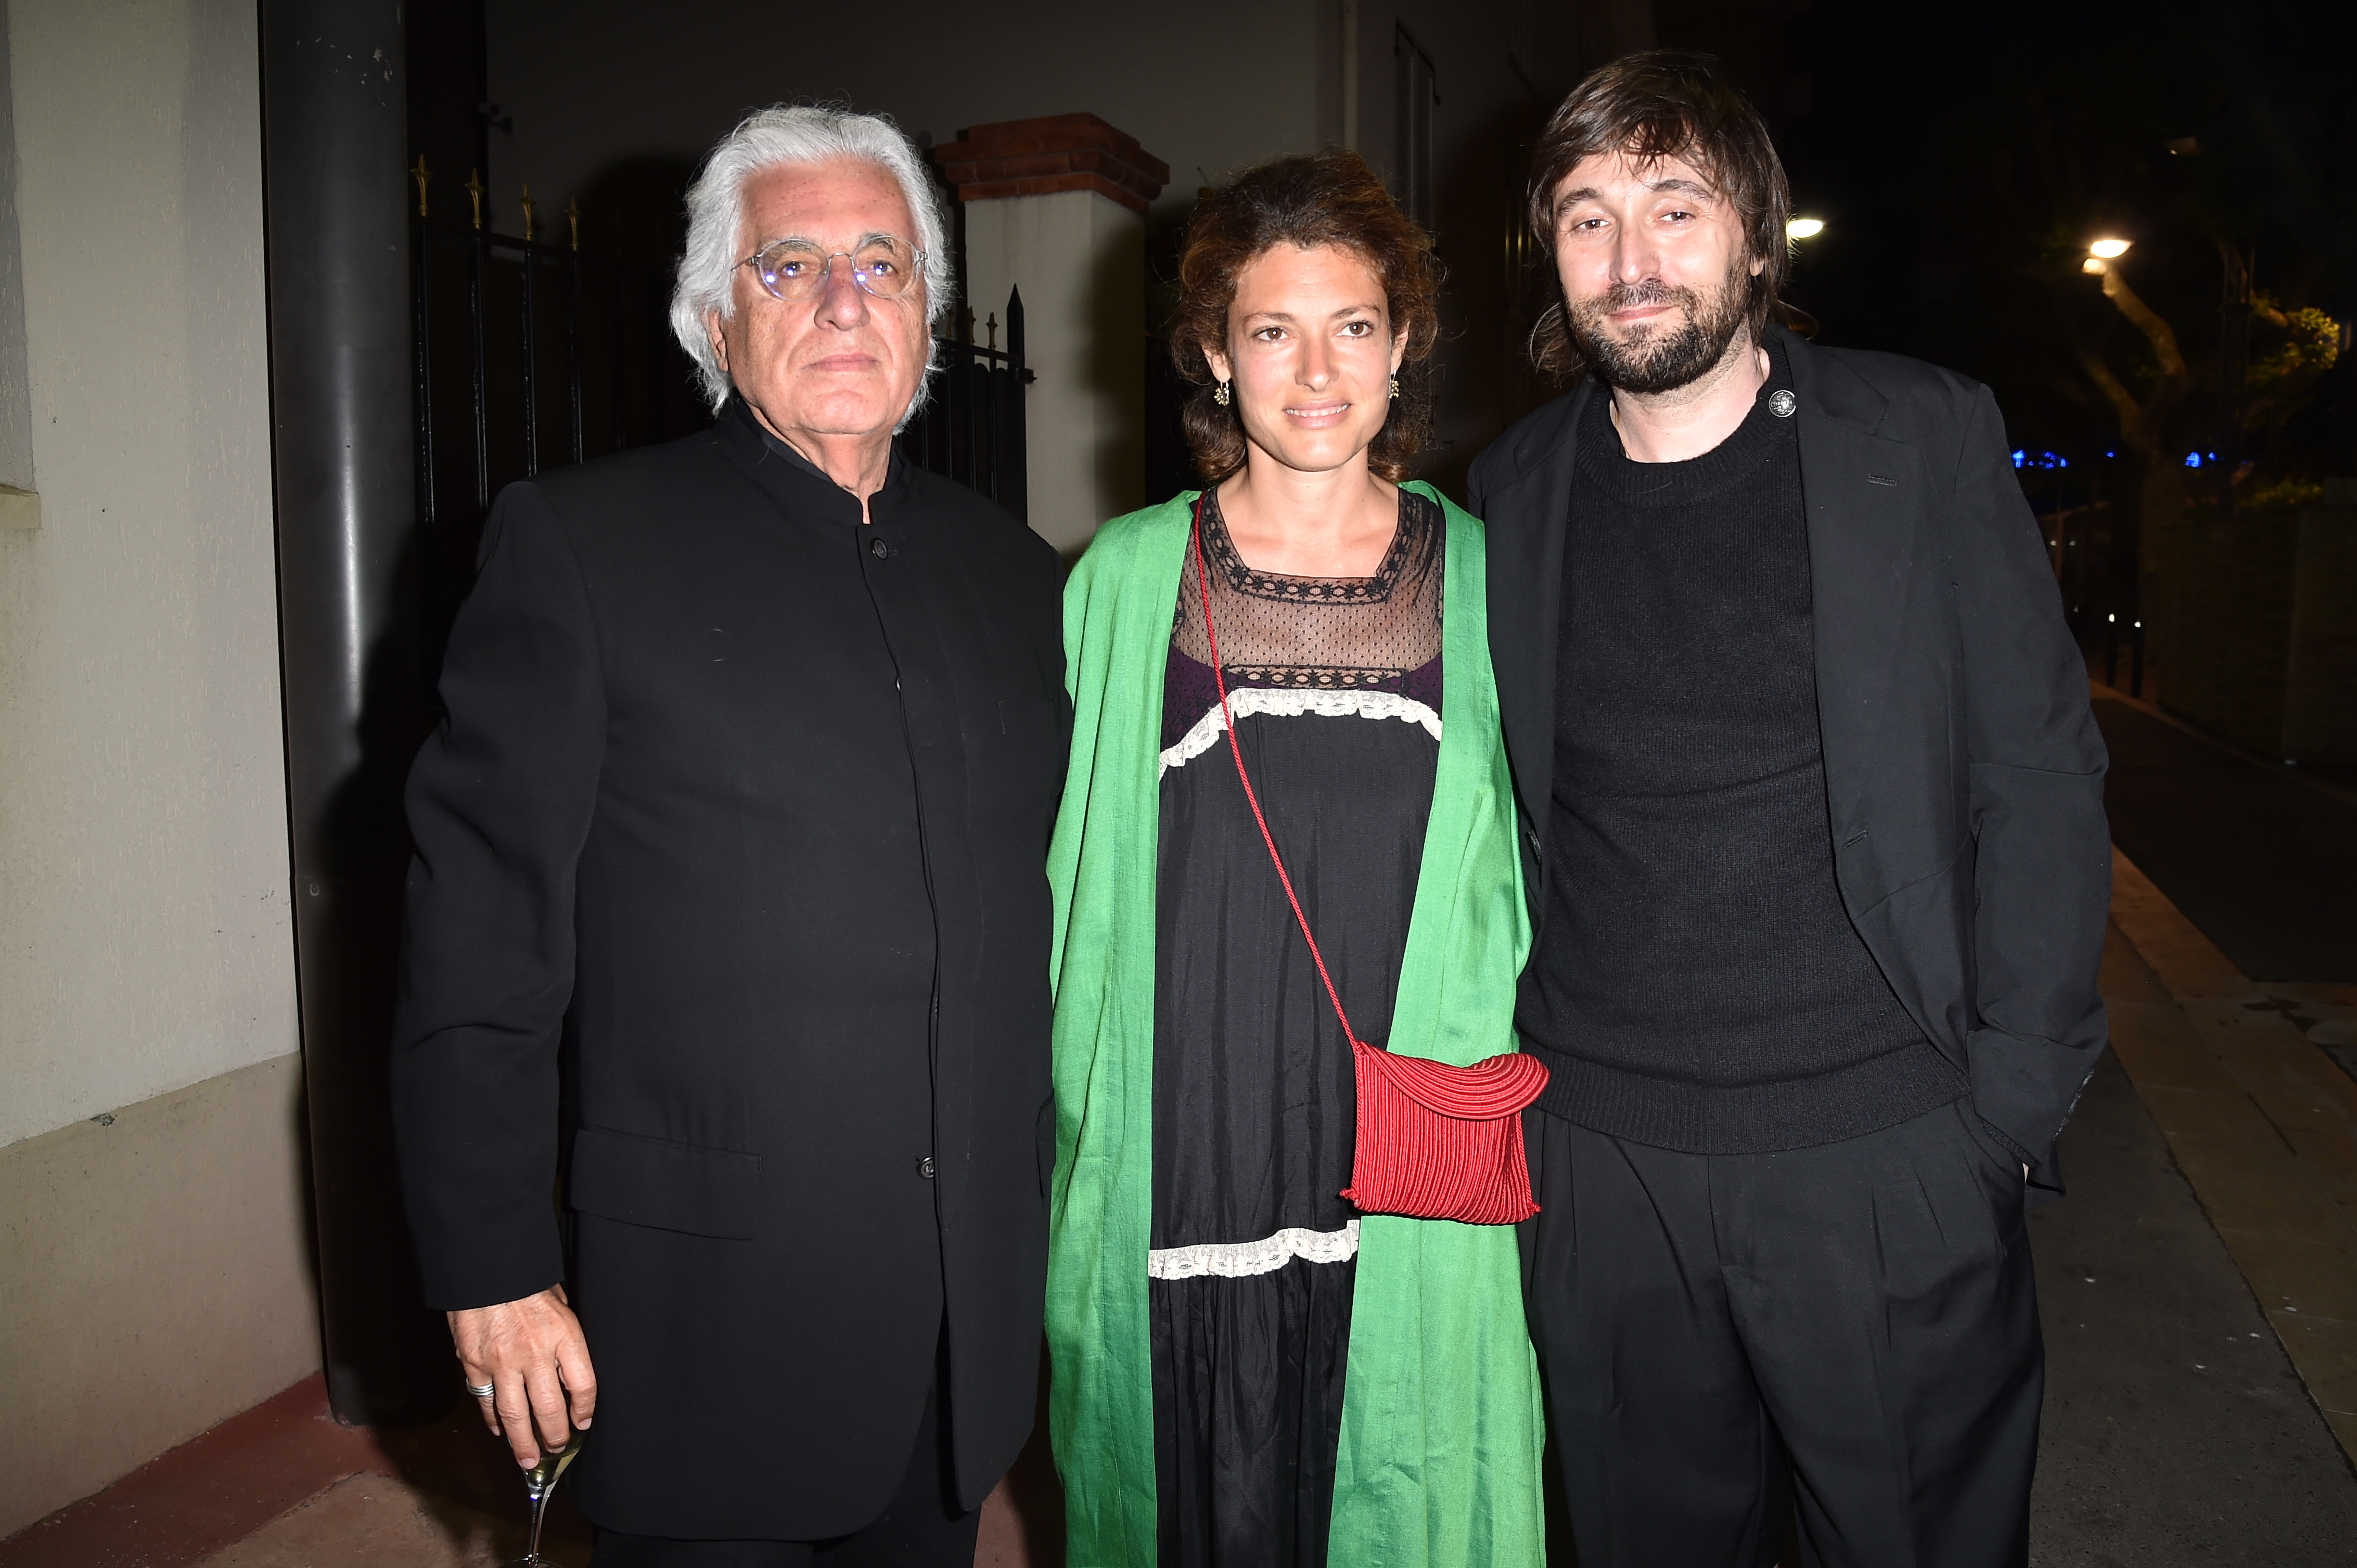 CANNES, FRANCE - MAY 22:  Germano Celant, Ginevra Elkann and Francesco Vezzoli attend Prada Private Dinner during the 70th annual Cannes Film Festival at Restaurant Fred L'Ecailler on May 22, 2017 in Cannes, France.  (Photo by Jacopo Raule/Getty Images for Prada)